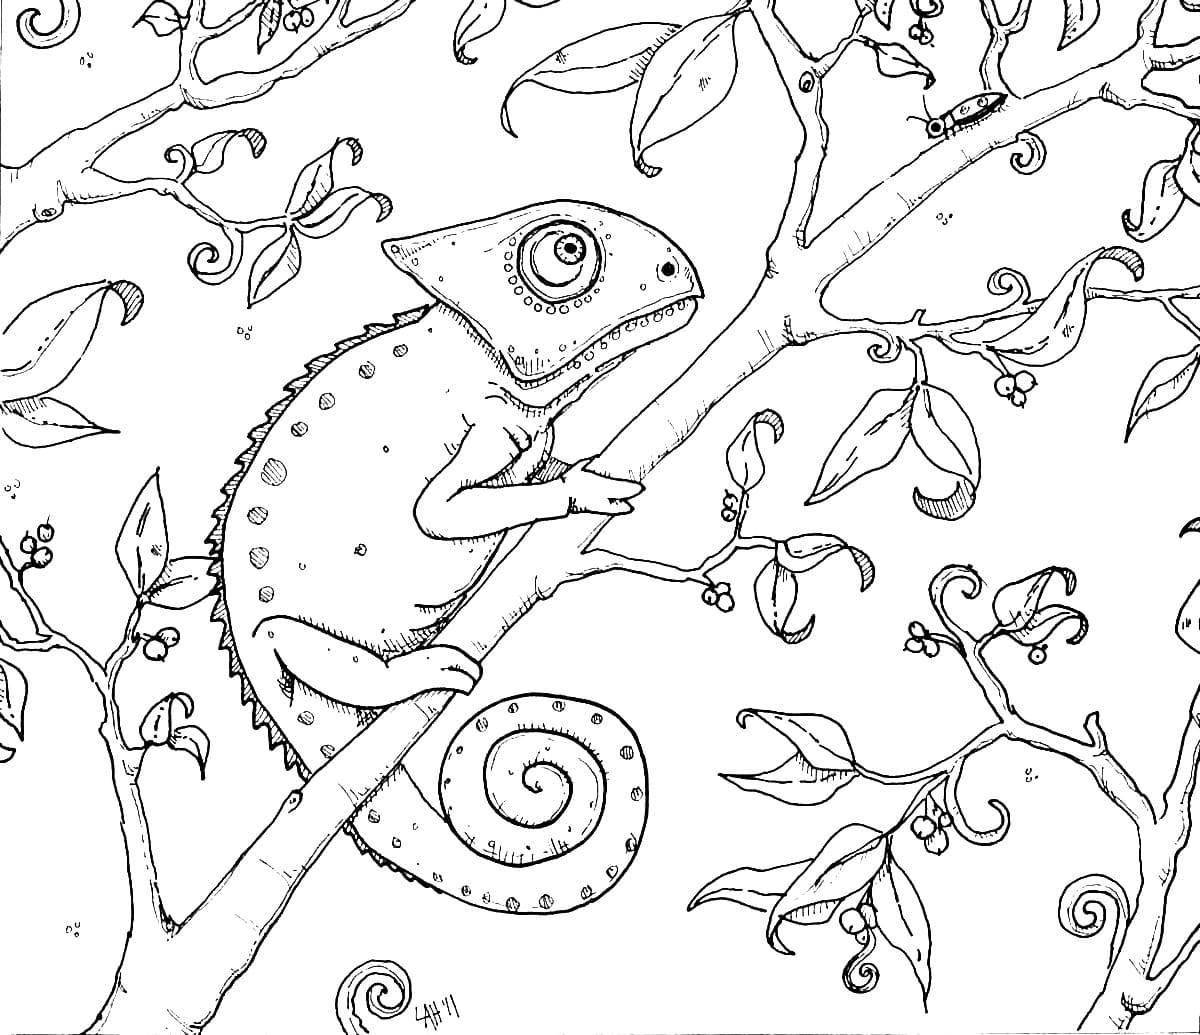 Cute chameleon coloring page